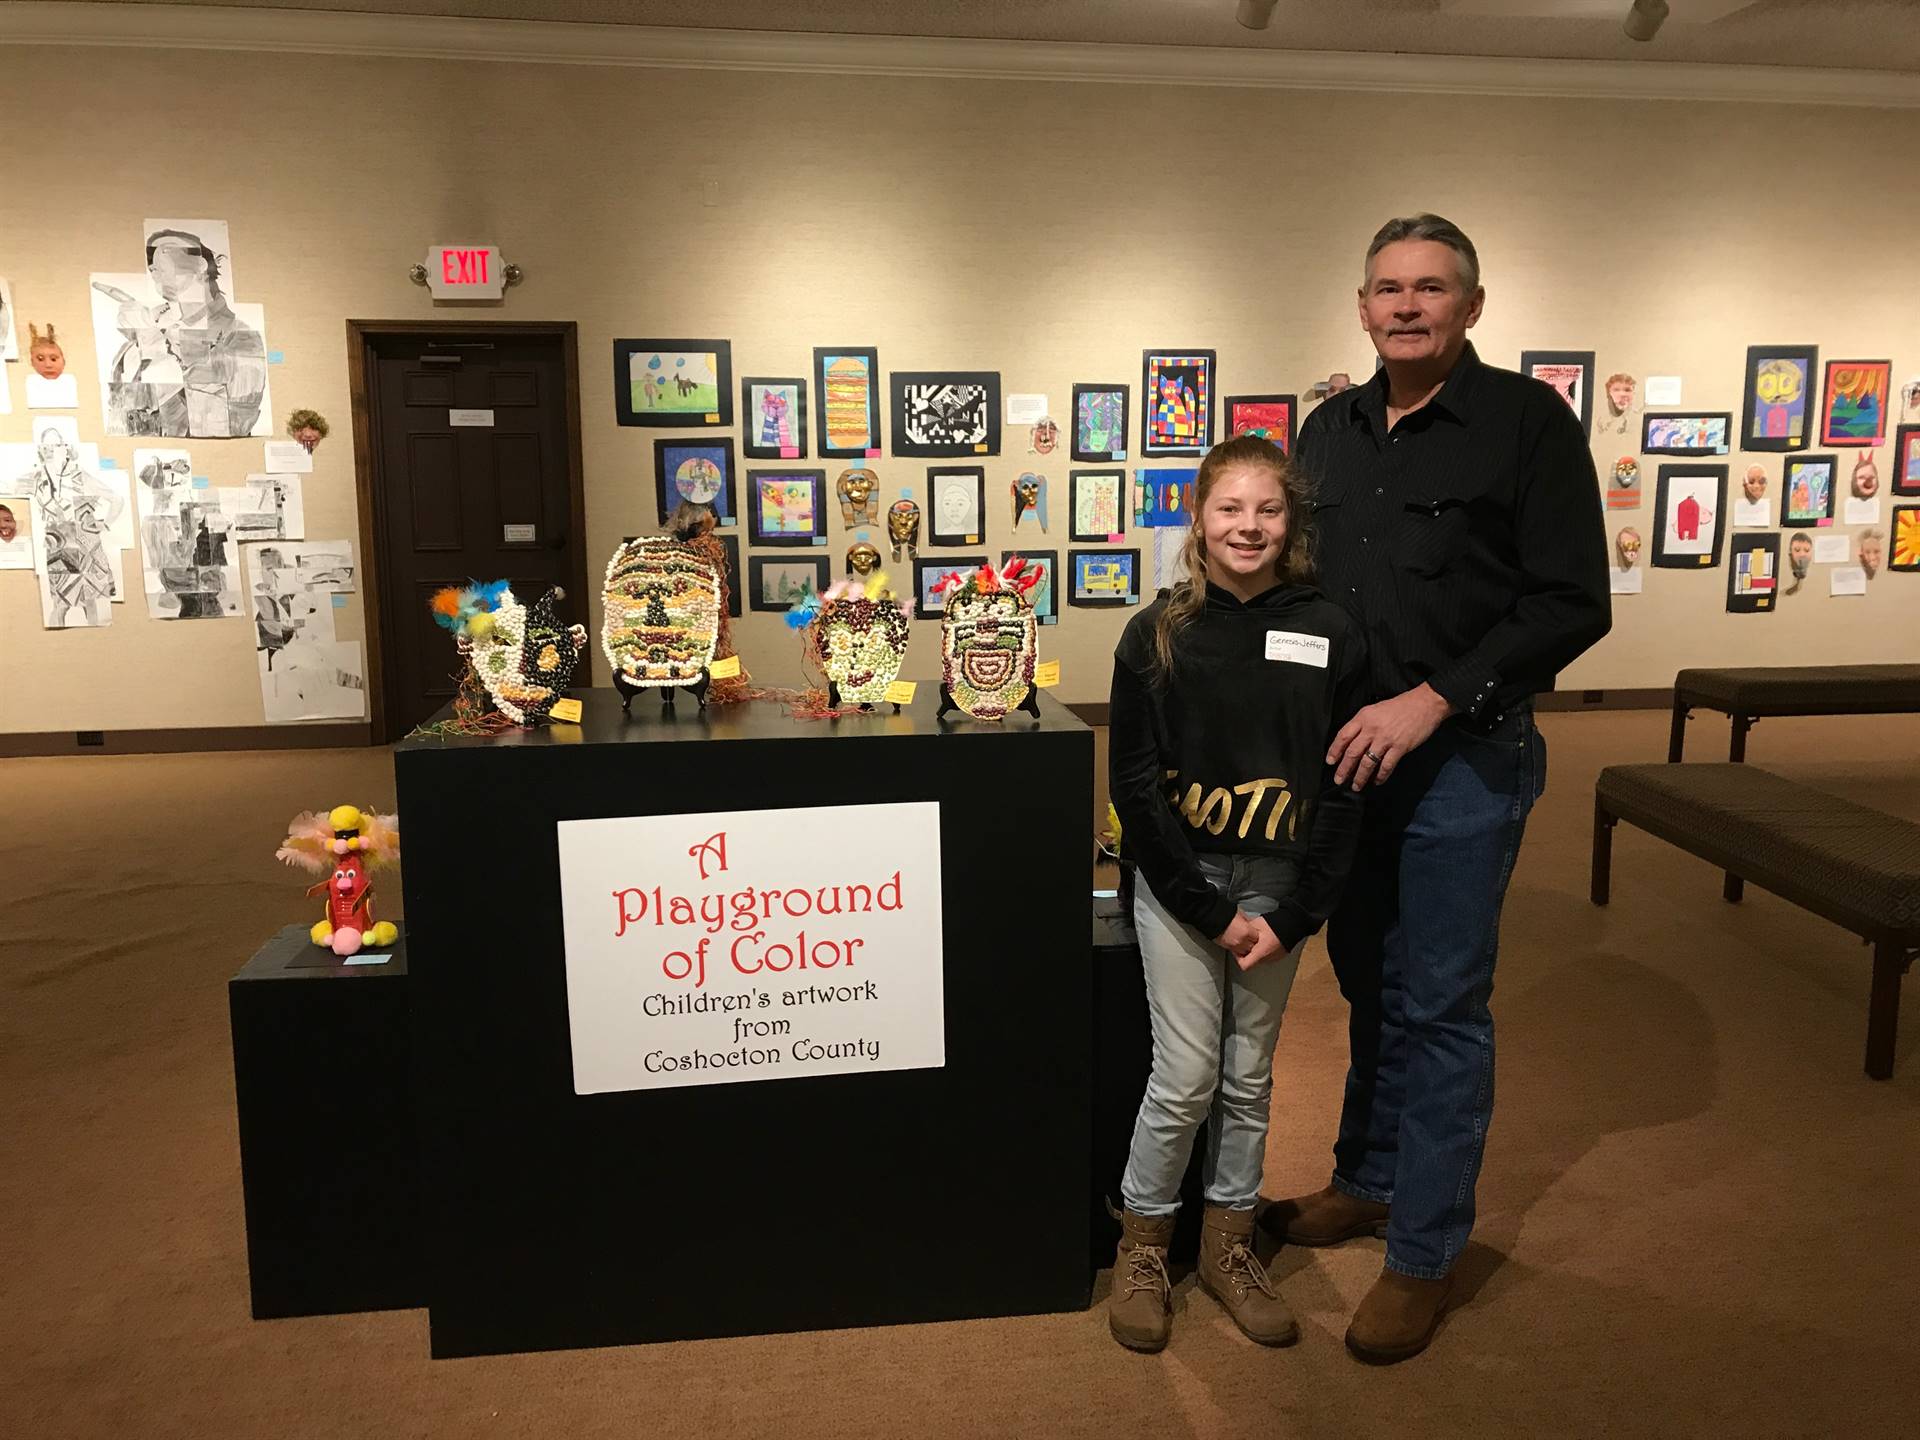 Student and Parent in front of Art display.